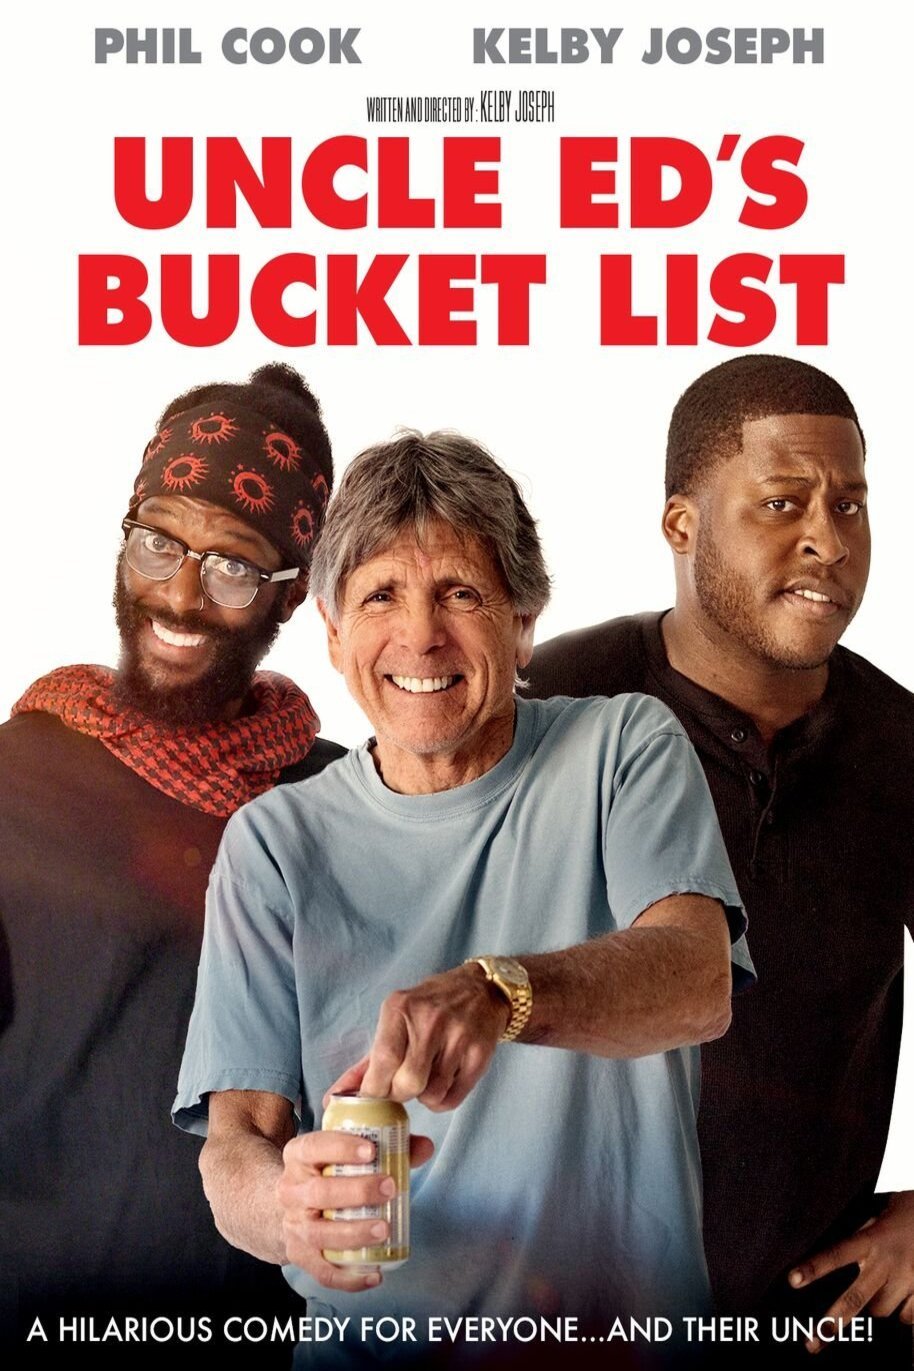 Poster of the movie Uncle Ed's Bucket List